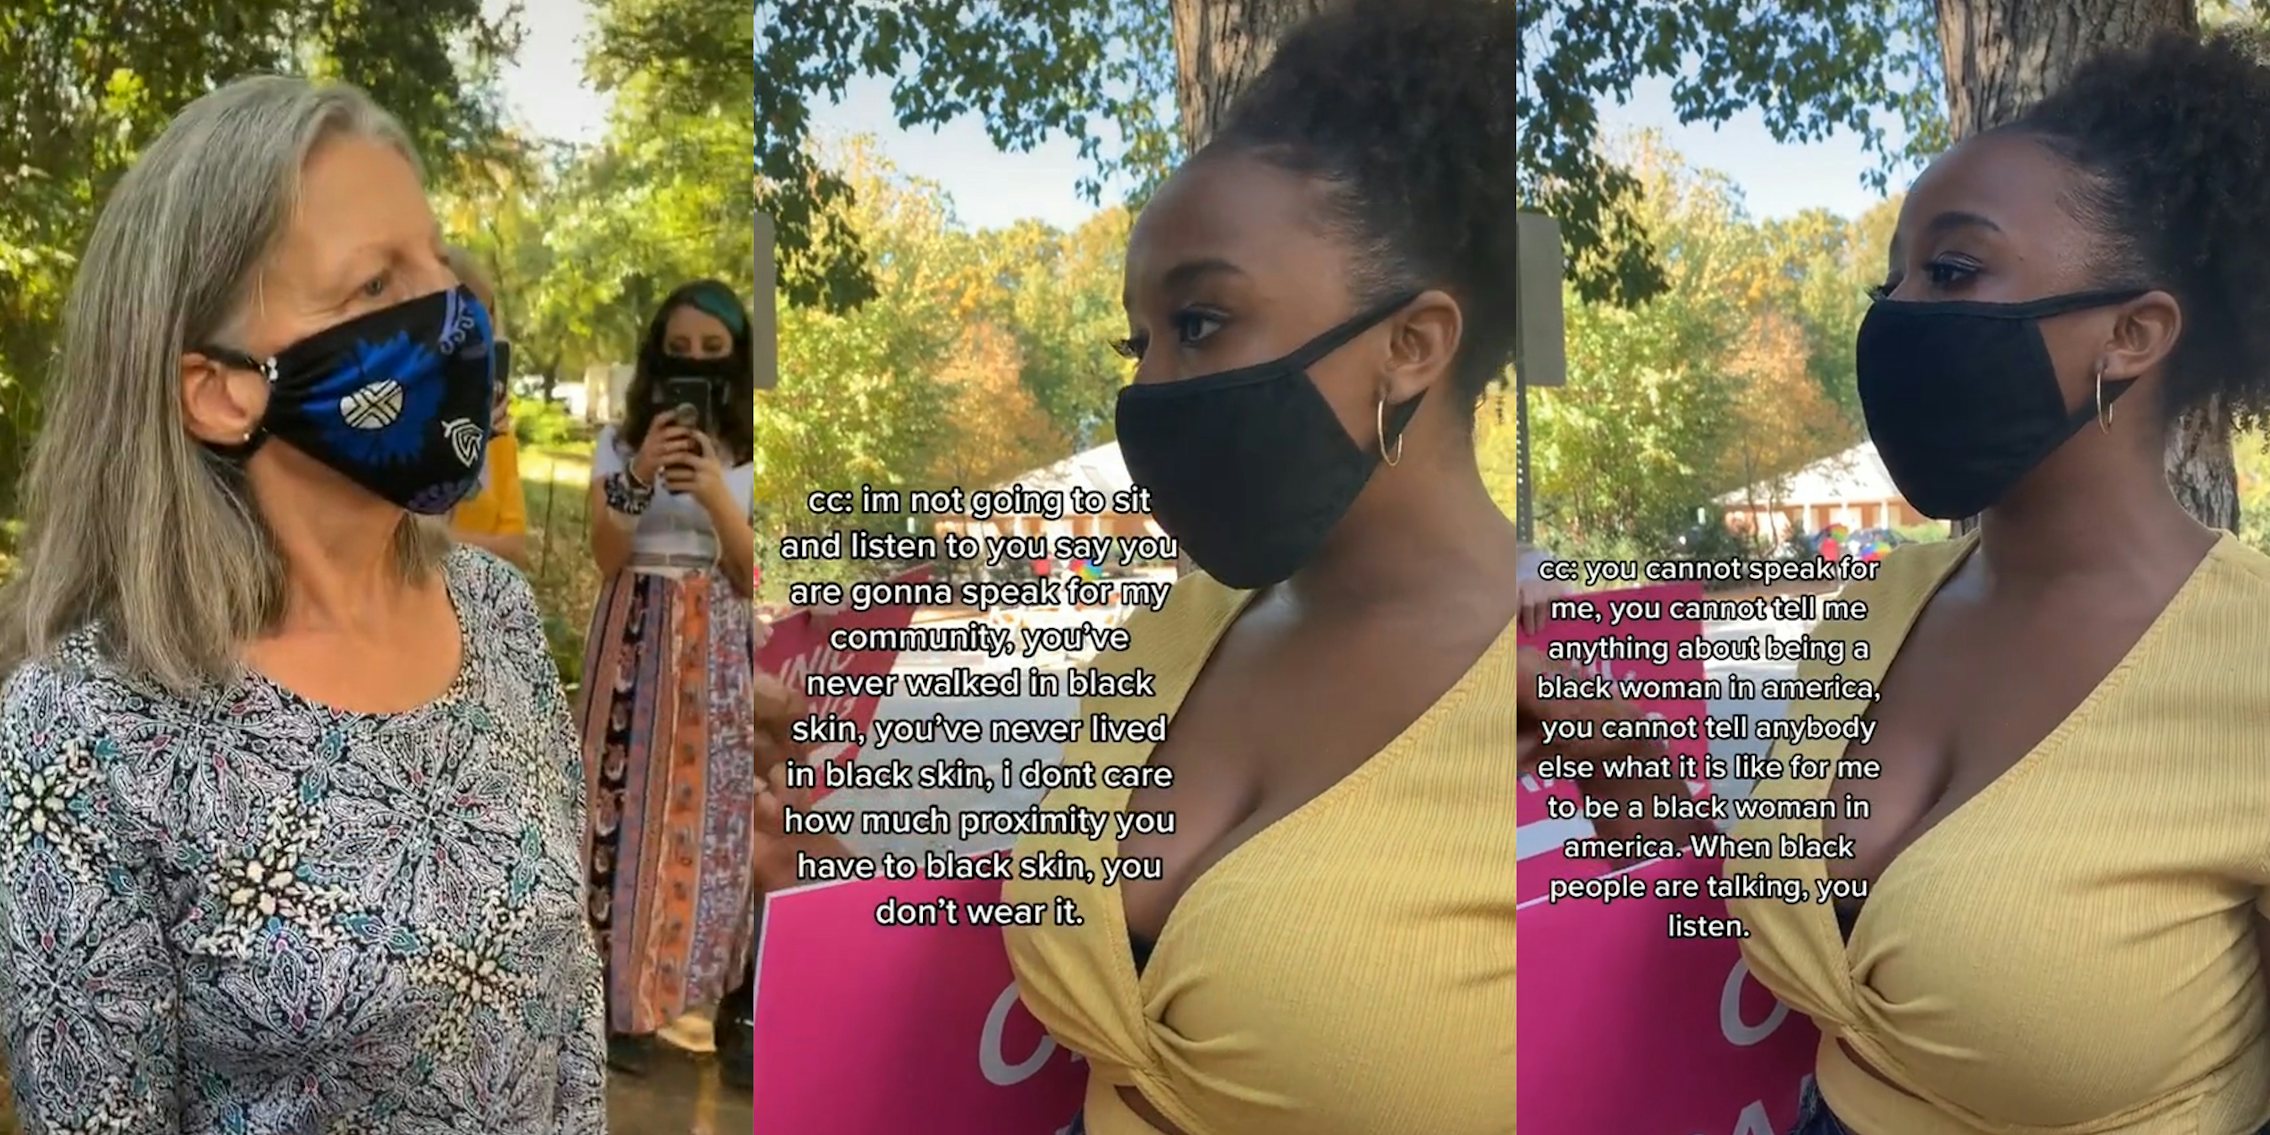 Black woman confronts white woman who claims to speak for Black people